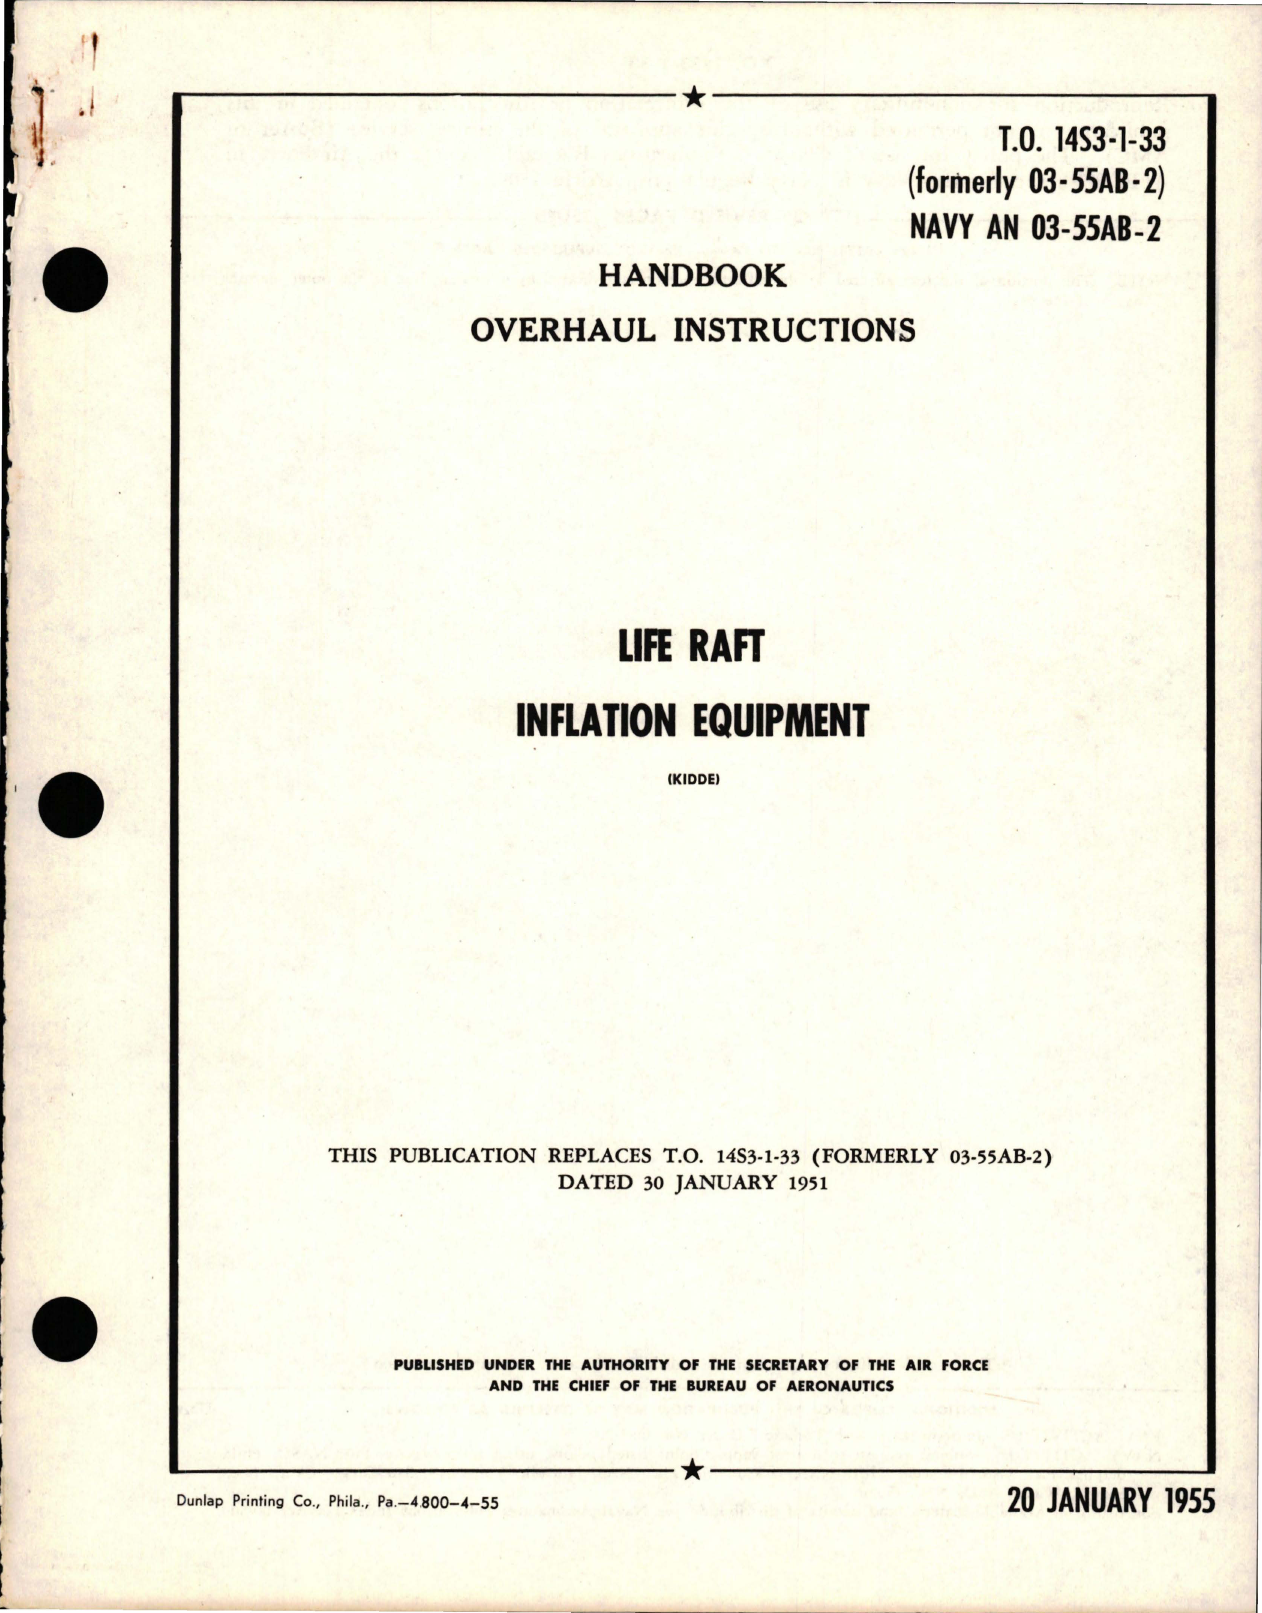 Sample page 1 from AirCorps Library document: Overhaul Instructions for Life Raft Inflation Equipment